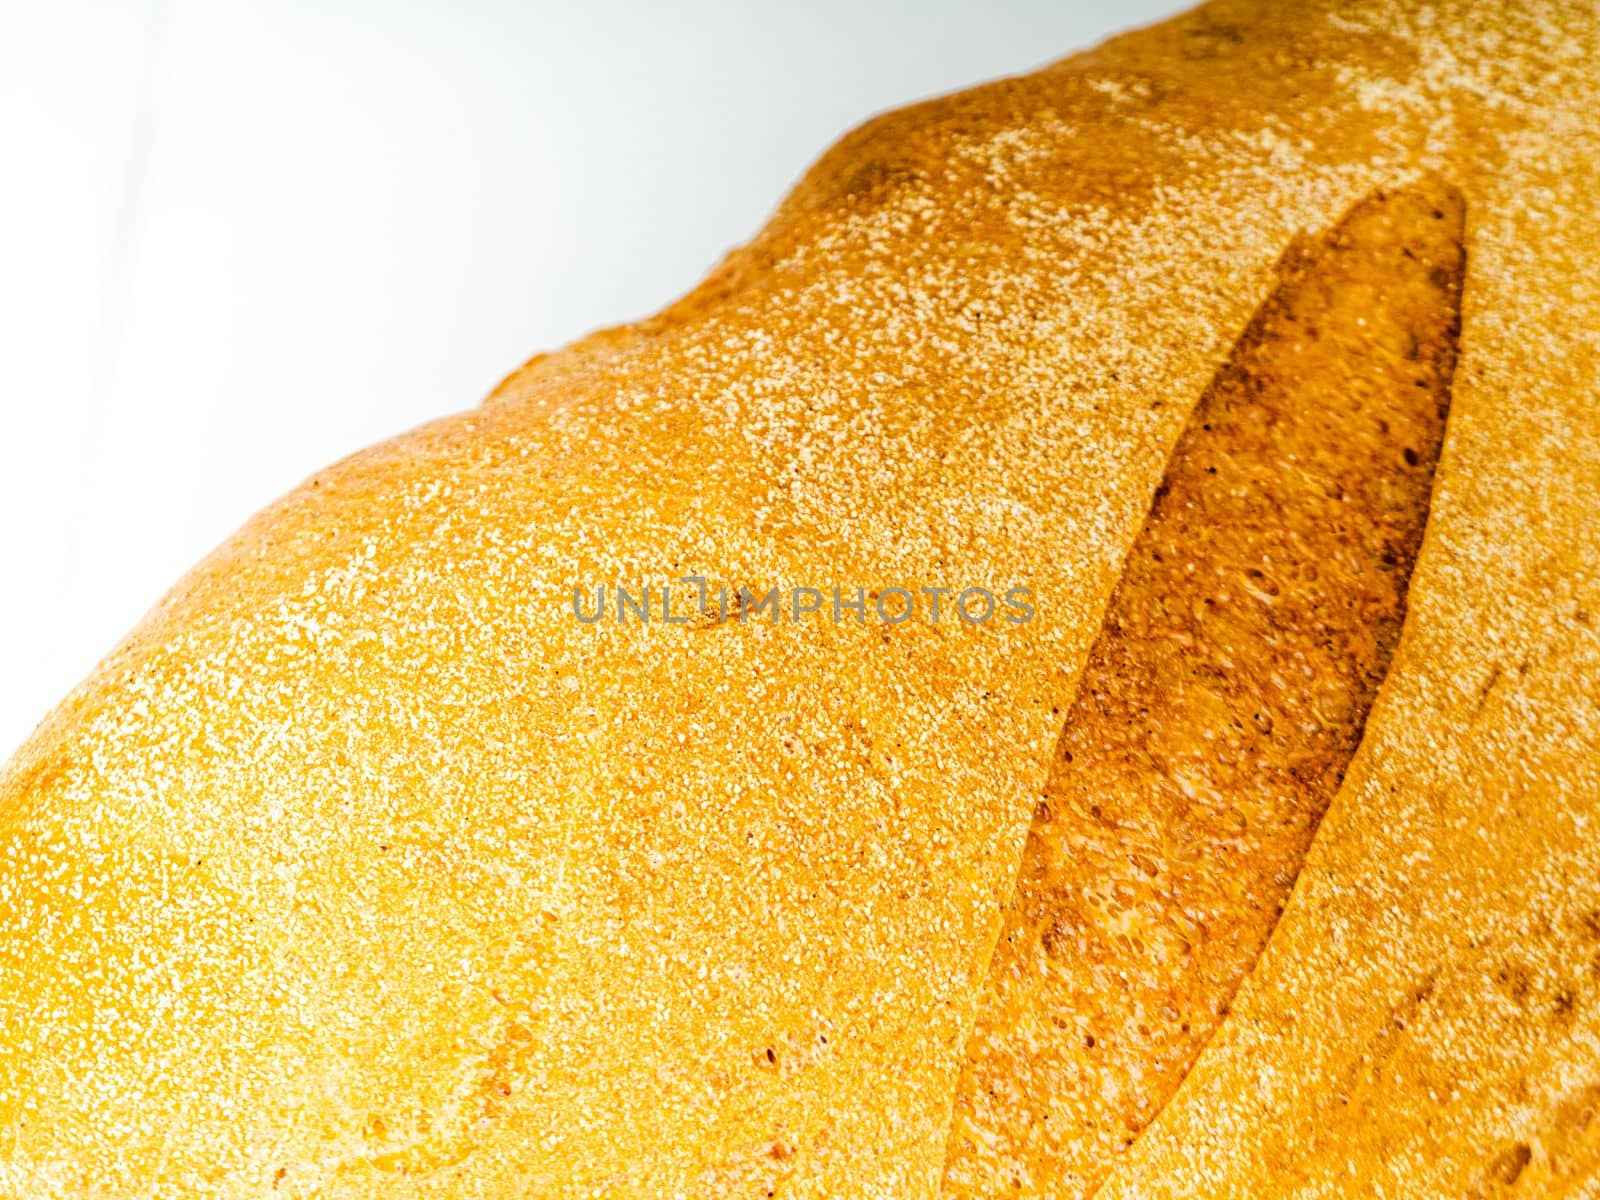 Isolated object on white background. Healthy baked bread, whole bread on white background.